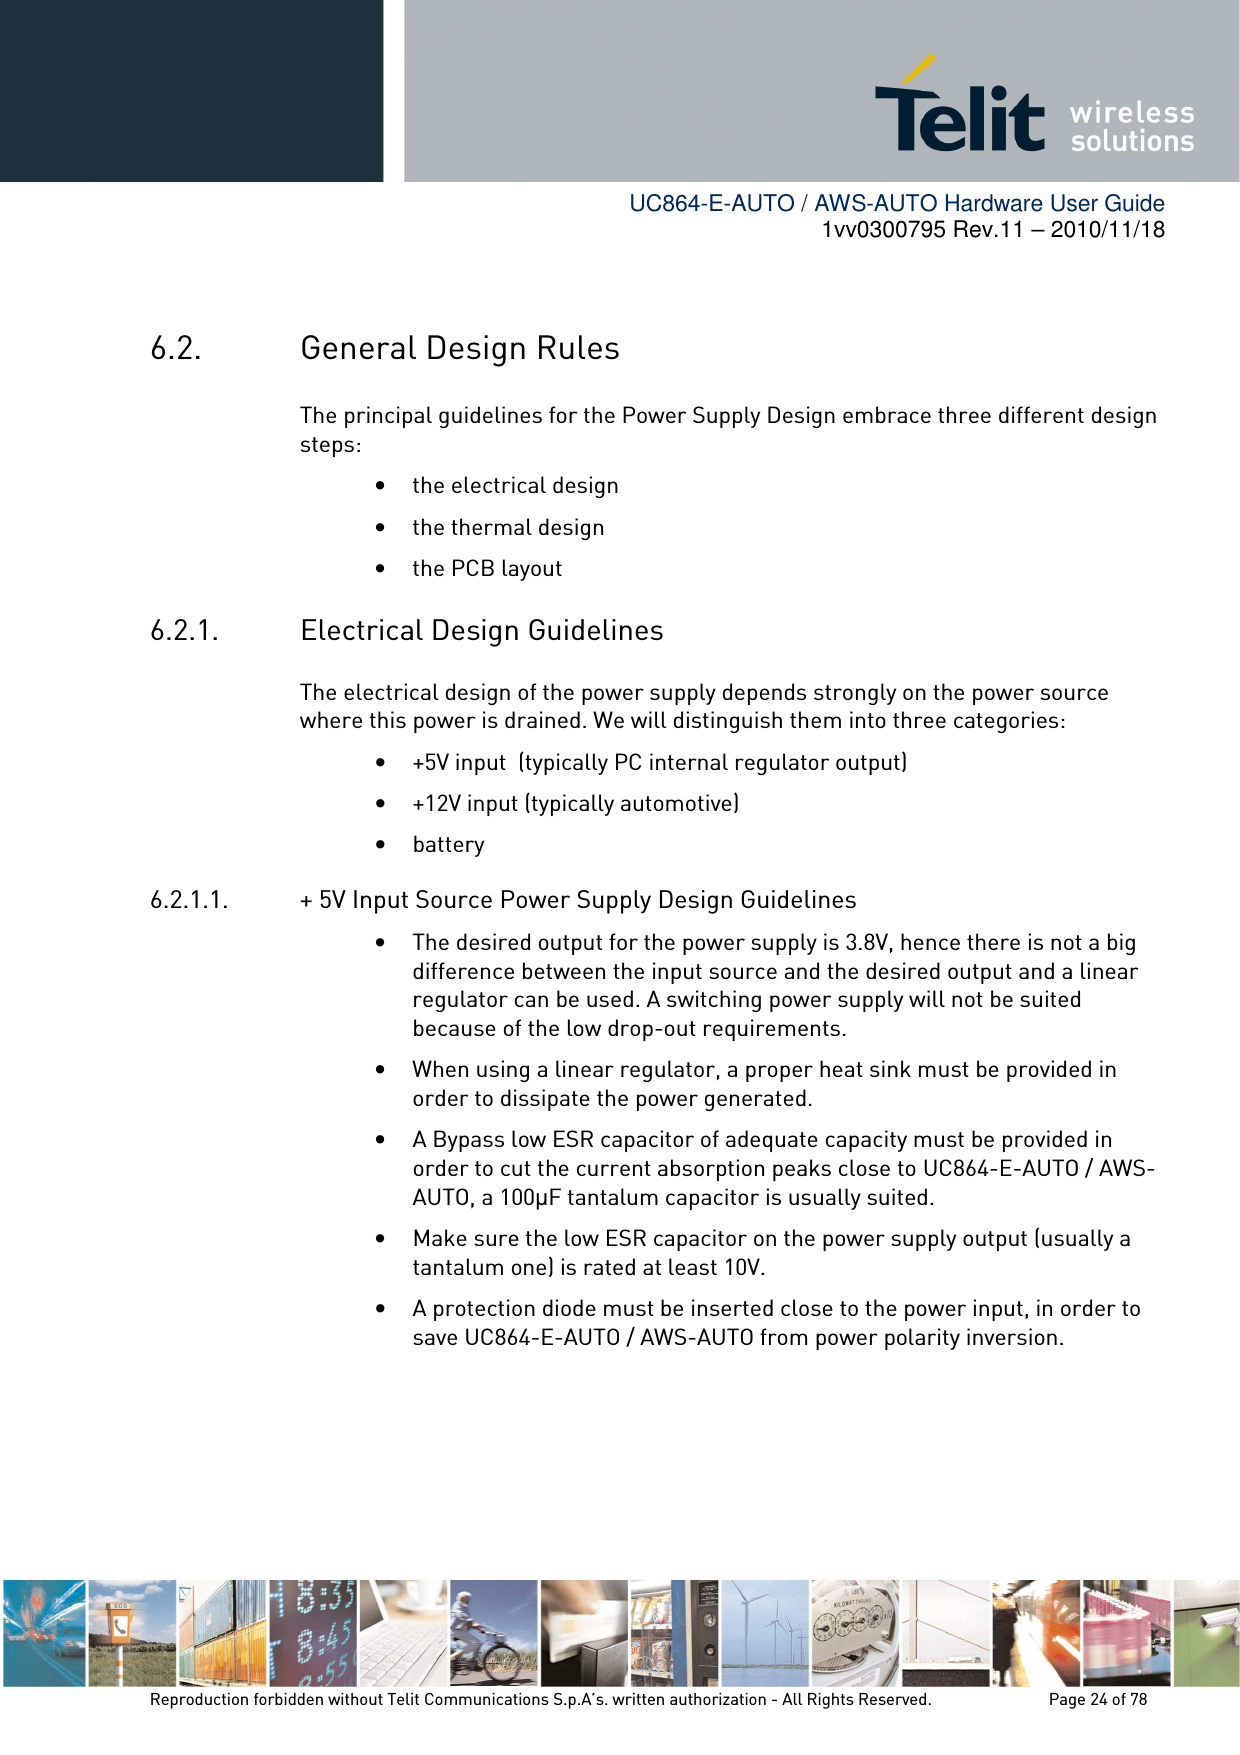        UC864-E-AUTO / AWS-AUTO Hardware User Guide 1vv0300795 Rev.11 – 2010/11/18     Reproduction forbidden without Telit Communications S.p.A’s. written authorization - All Rights Reserved.    Page 24 of 78   6.2. General Design Rules The principal guidelines for the Power Supply Design embrace three different design steps: • the electrical design • the thermal design • the PCB layout 6.2.1. Electrical Design Guidelines The electrical design of the power supply depends strongly on the power source where this power is drained. We will distinguish them into three categories: • +5V input  (typically PC internal regulator output) • +12V input (typically automotive) • battery 6.2.1.1. + 5V Input Source Power Supply Design Guidelines • The desired output for the power supply is 3.8V, hence there is not a big difference between the input source and the desired output and a linear regulator can be used. A switching power supply will not be suited because of the low drop-out requirements. • When using a linear regulator, a proper heat sink must be provided in order to dissipate the power generated. • A Bypass low ESR capacitor of adequate capacity must be provided in order to cut the current absorption peaks close to UC864-E-AUTO / AWS-AUTO, a 100µF tantalum capacitor is usually suited. • Make sure the low ESR capacitor on the power supply output (usually a tantalum one) is rated at least 10V. • A protection diode must be inserted close to the power input, in order to save UC864-E-AUTO / AWS-AUTO from power polarity inversion.     